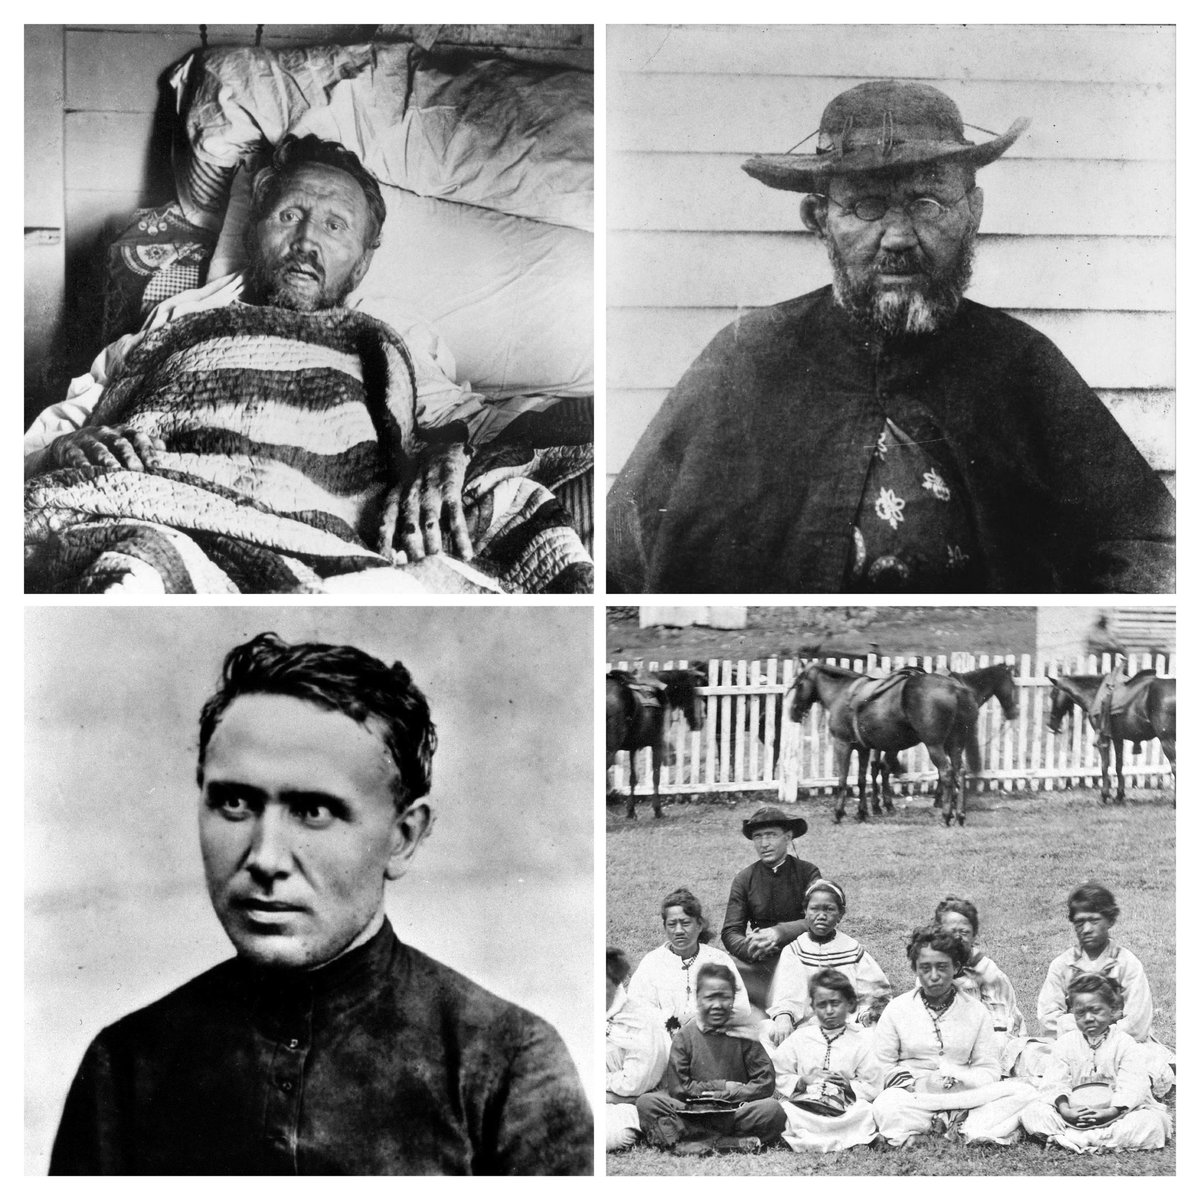 A closing thought tonight from St. Damien of Molokai 'My greatest pleasure is to serve the Lord in His poor children rejected by other people.' Good night blessings, my friends. Joined in prayers with #Gratitude and for #Peace 🙏🌎✝️🙏 St. Damien, pray for us. #PrayTheRosary 🙏🕊️